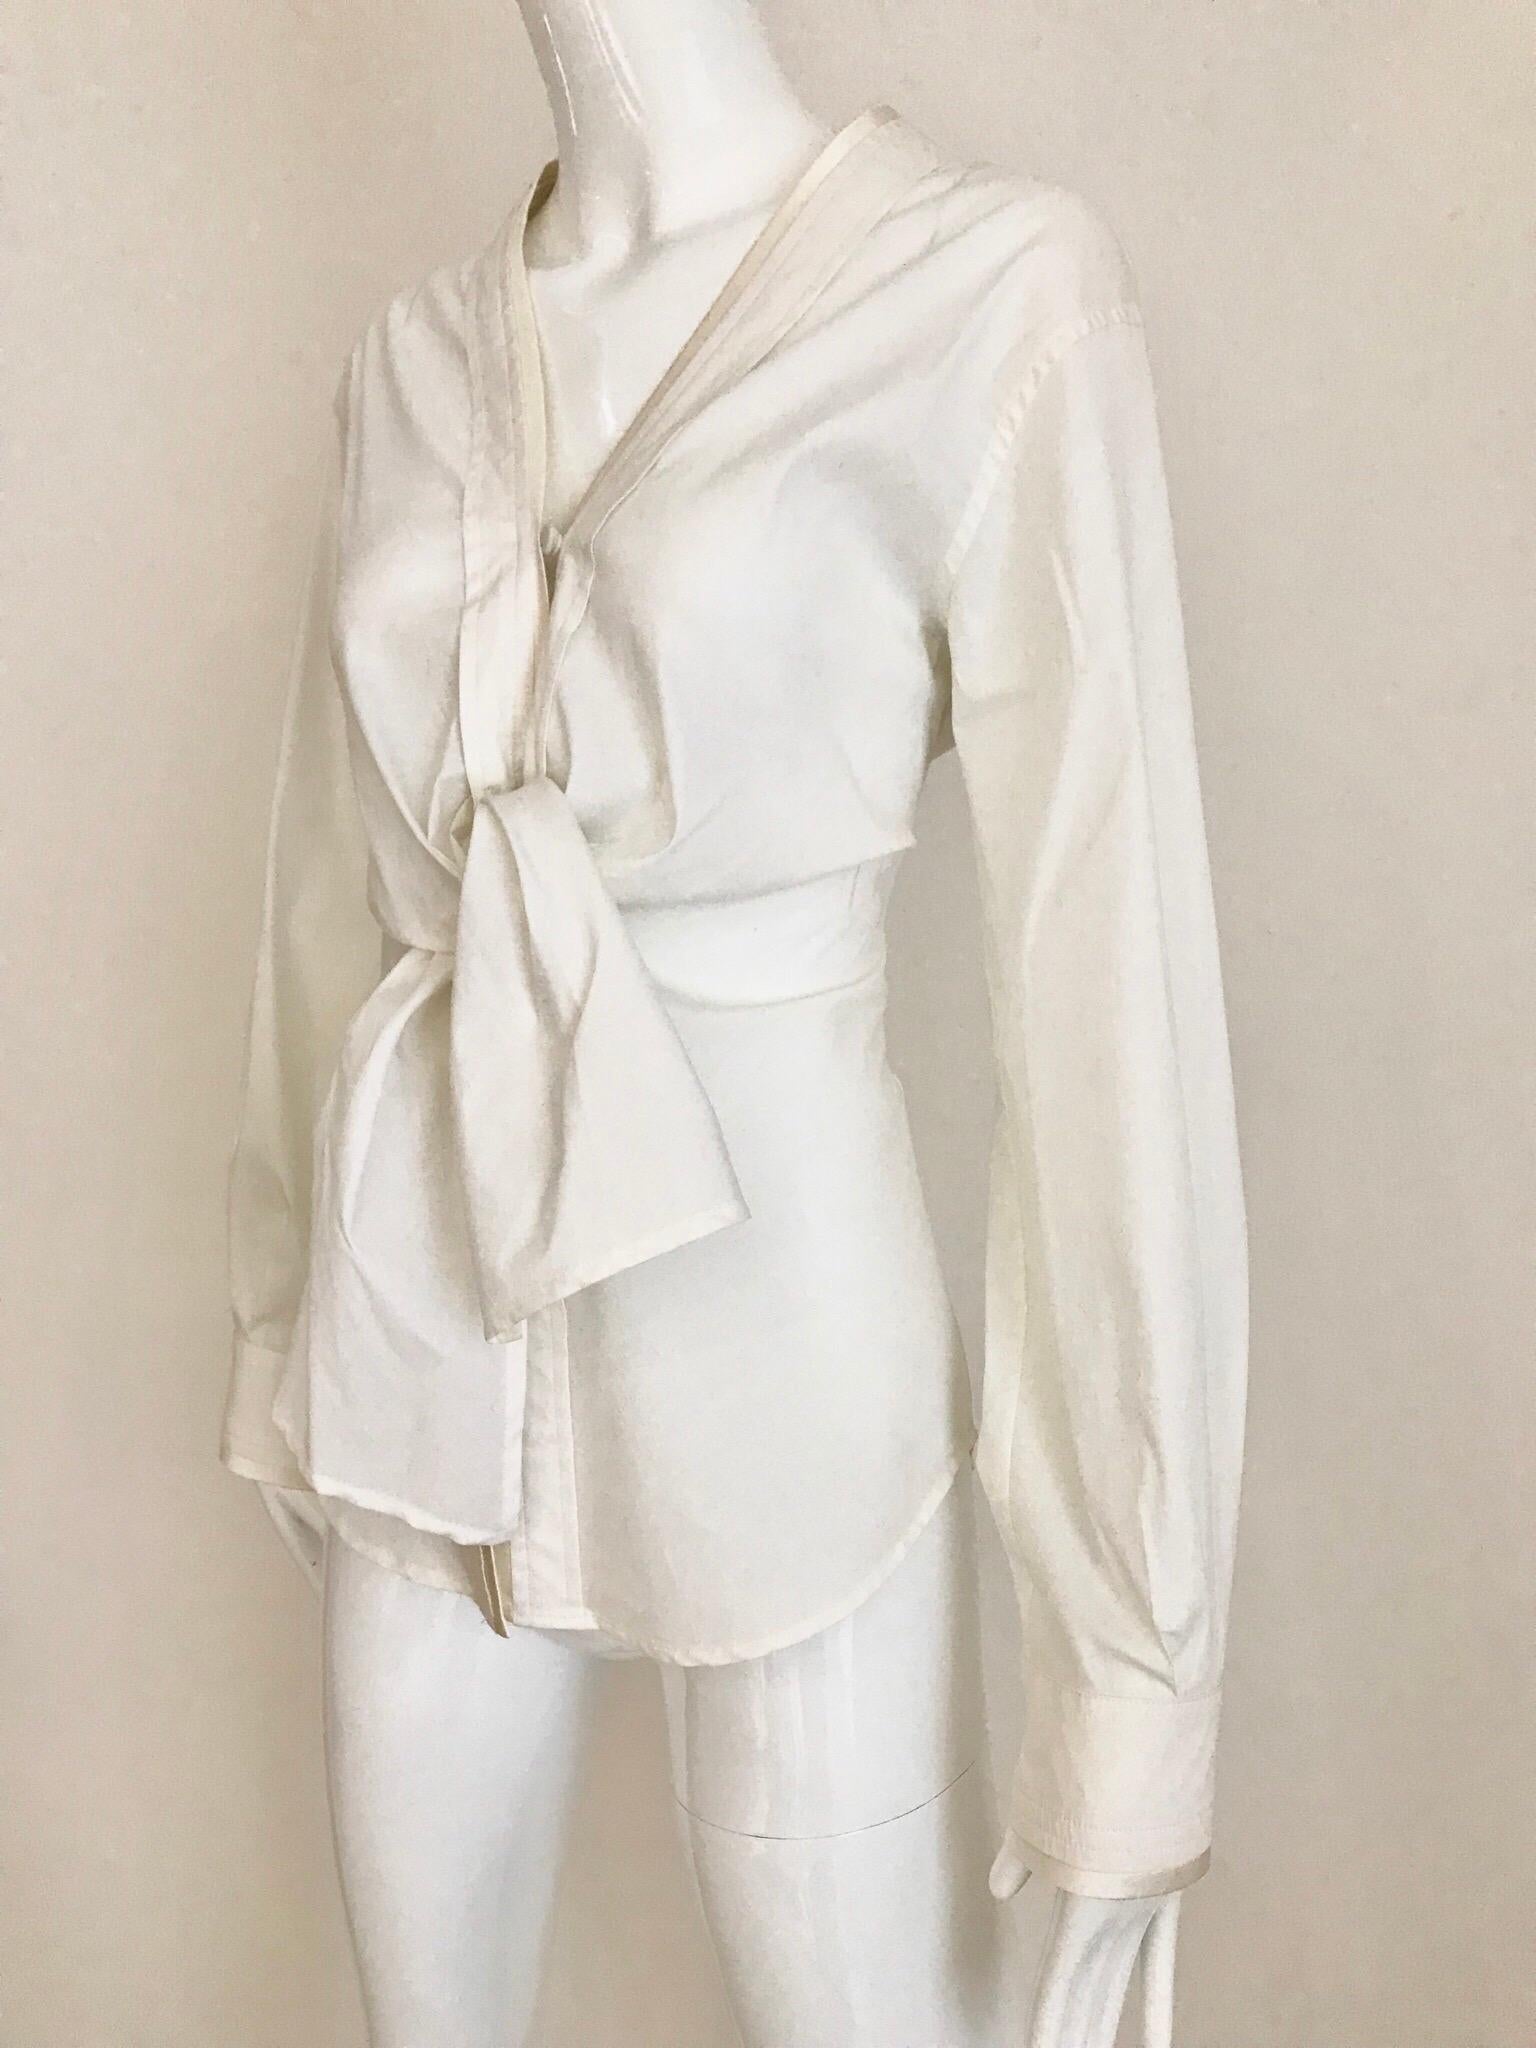 Yves Saint Laurent white creme cotton button tie front blouse designed by Tom Ford era.
Size:  Medium
Bust: 36 inches/ Waist: 32 inches/  blouse length: 27 inches
**** This Garment has been professionally Dry Cleaned and Ready to wear.


